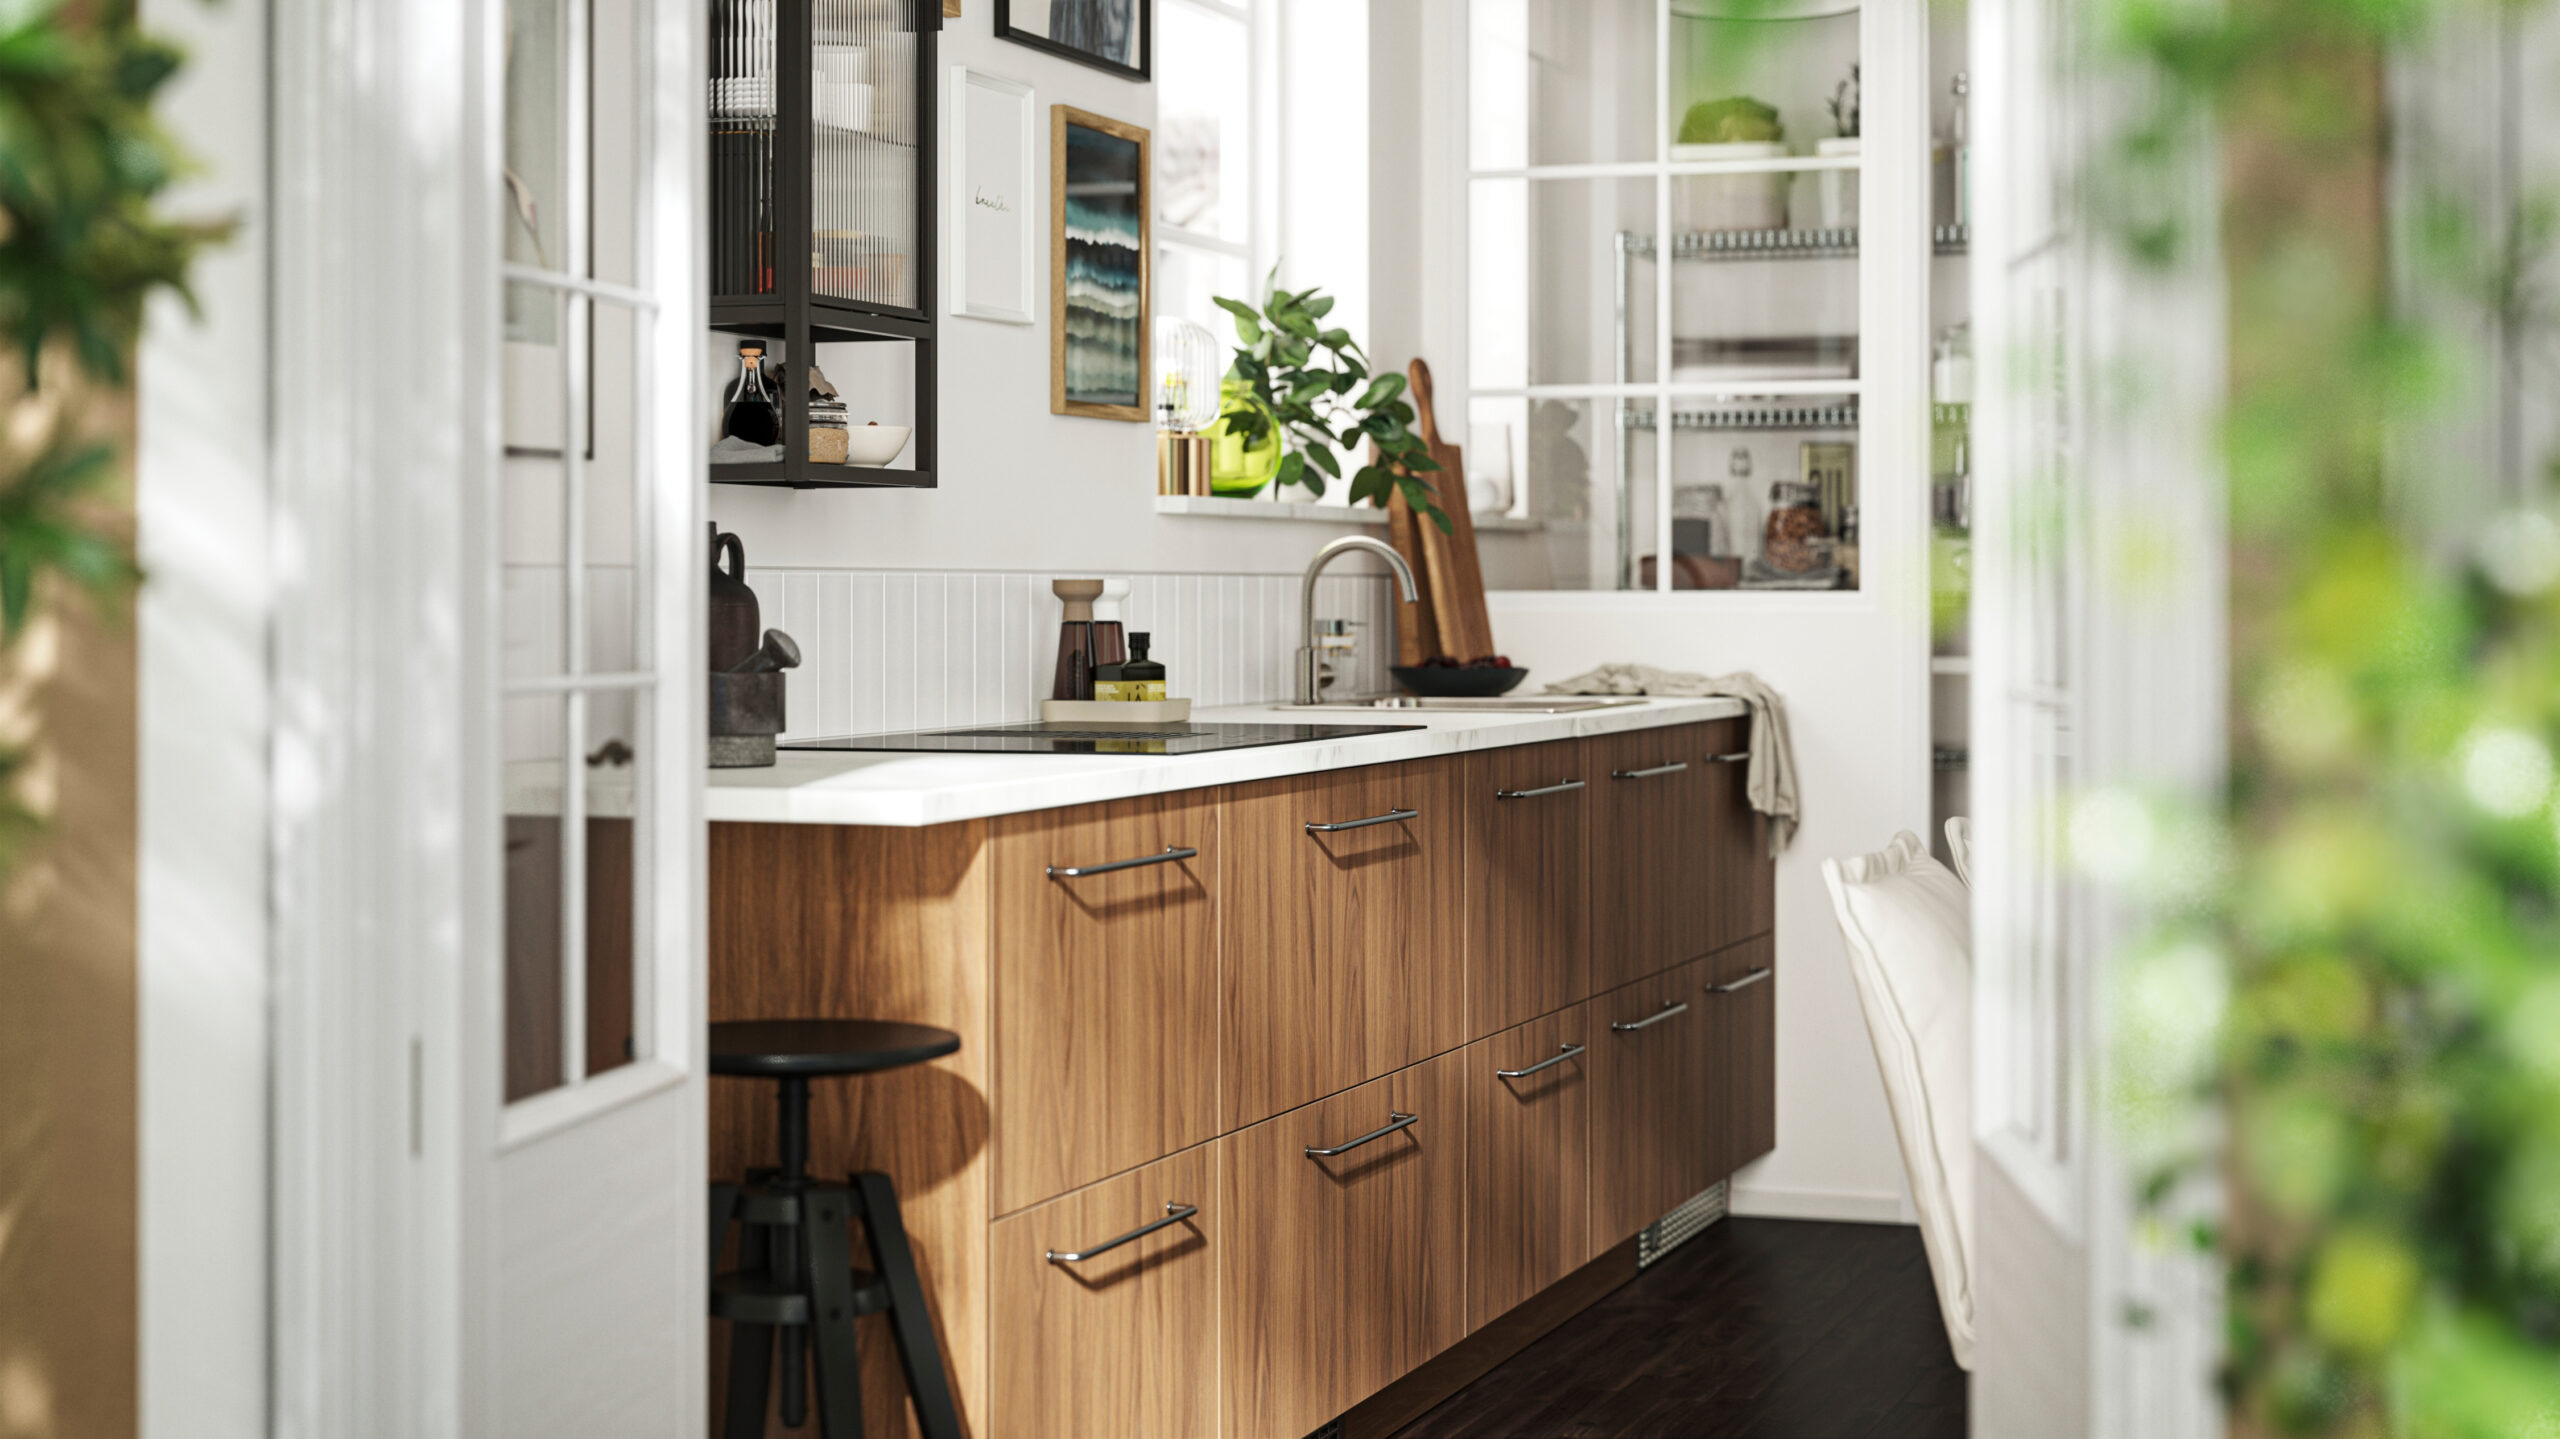 A gallery of kitchen inspiration - IKEA